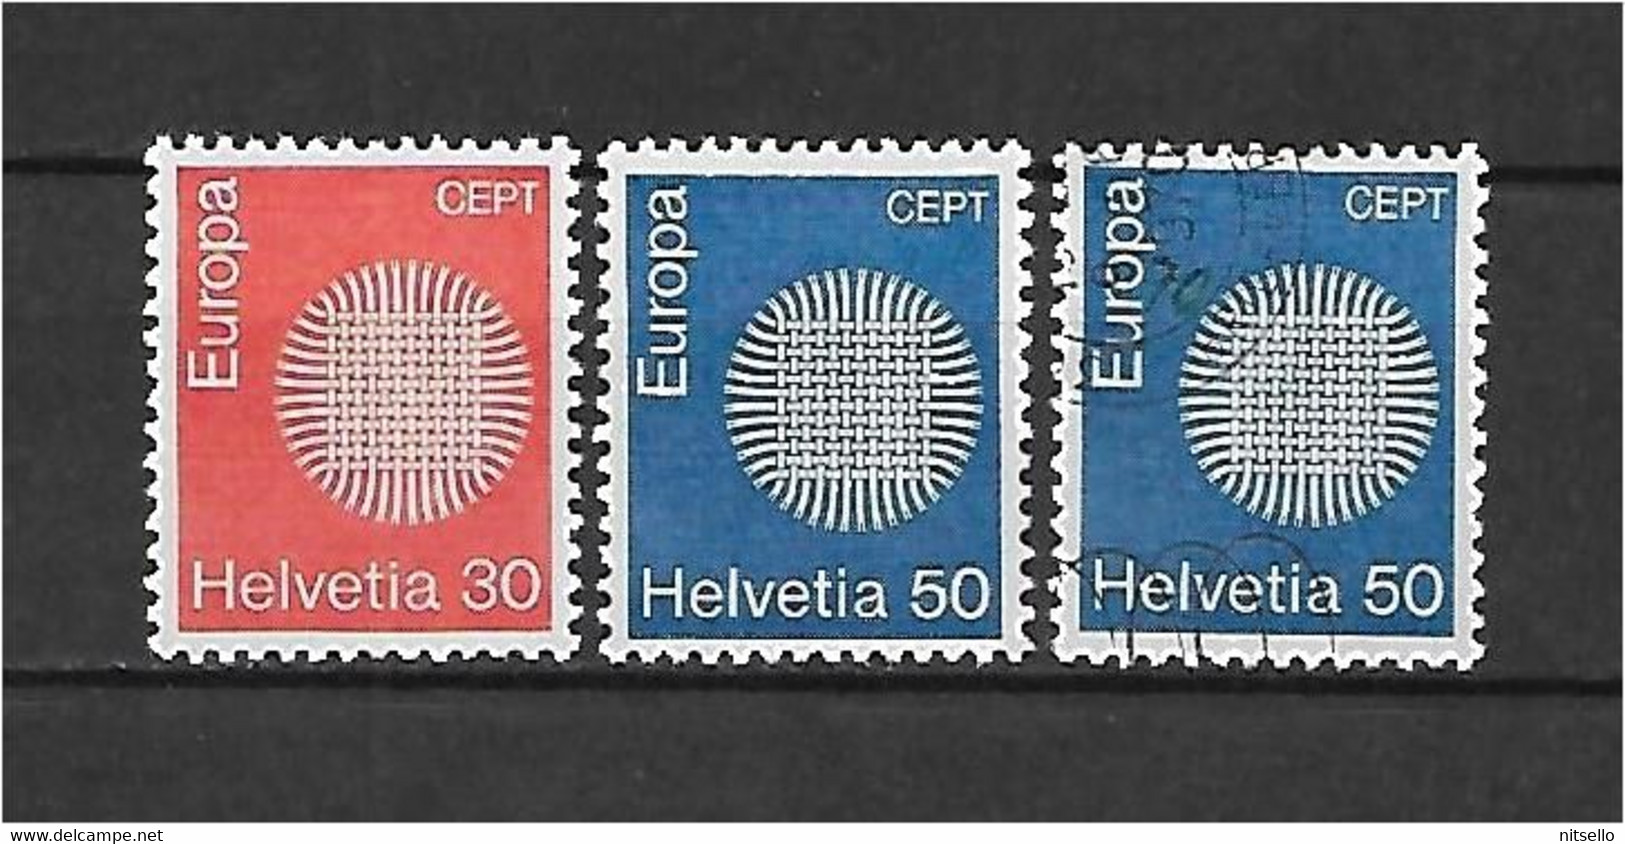 LOTE 1530  ///  SUIZA   YVERT Nº:855/856  ¡¡¡ OFERTA - LIQUIDATION - JE LIQUIDE !!! - Used Stamps